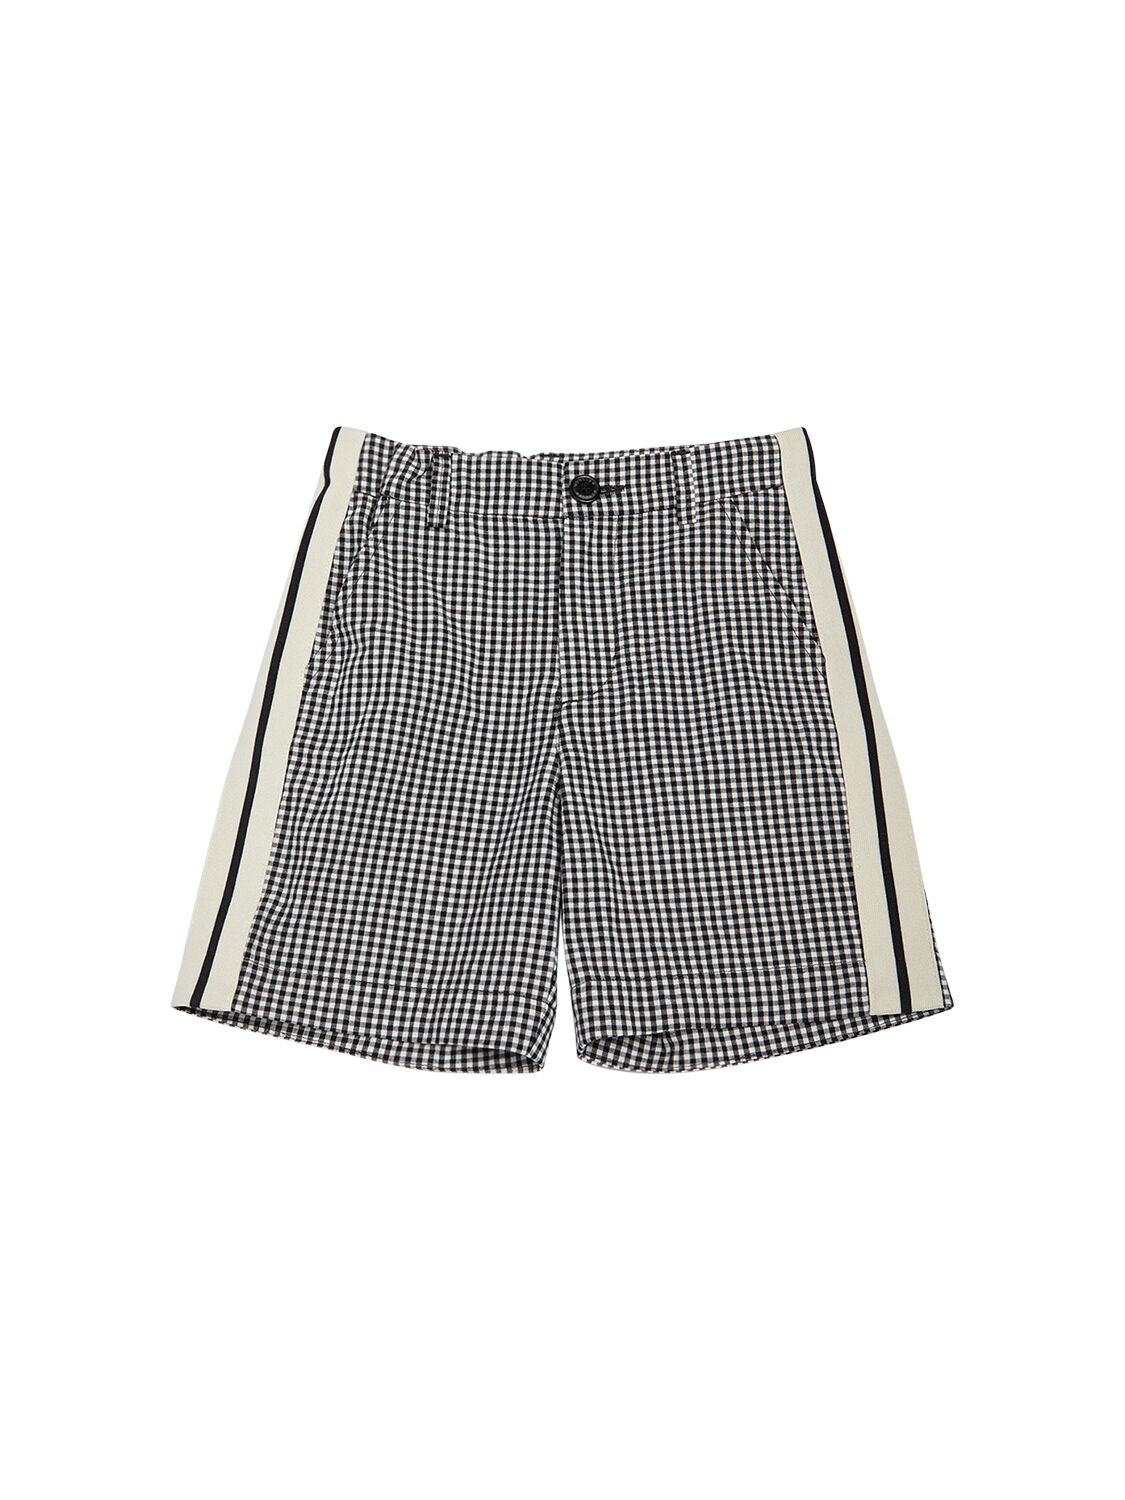 Moncler Kids' Gingham Printed Cotton Shorts In Light Blue